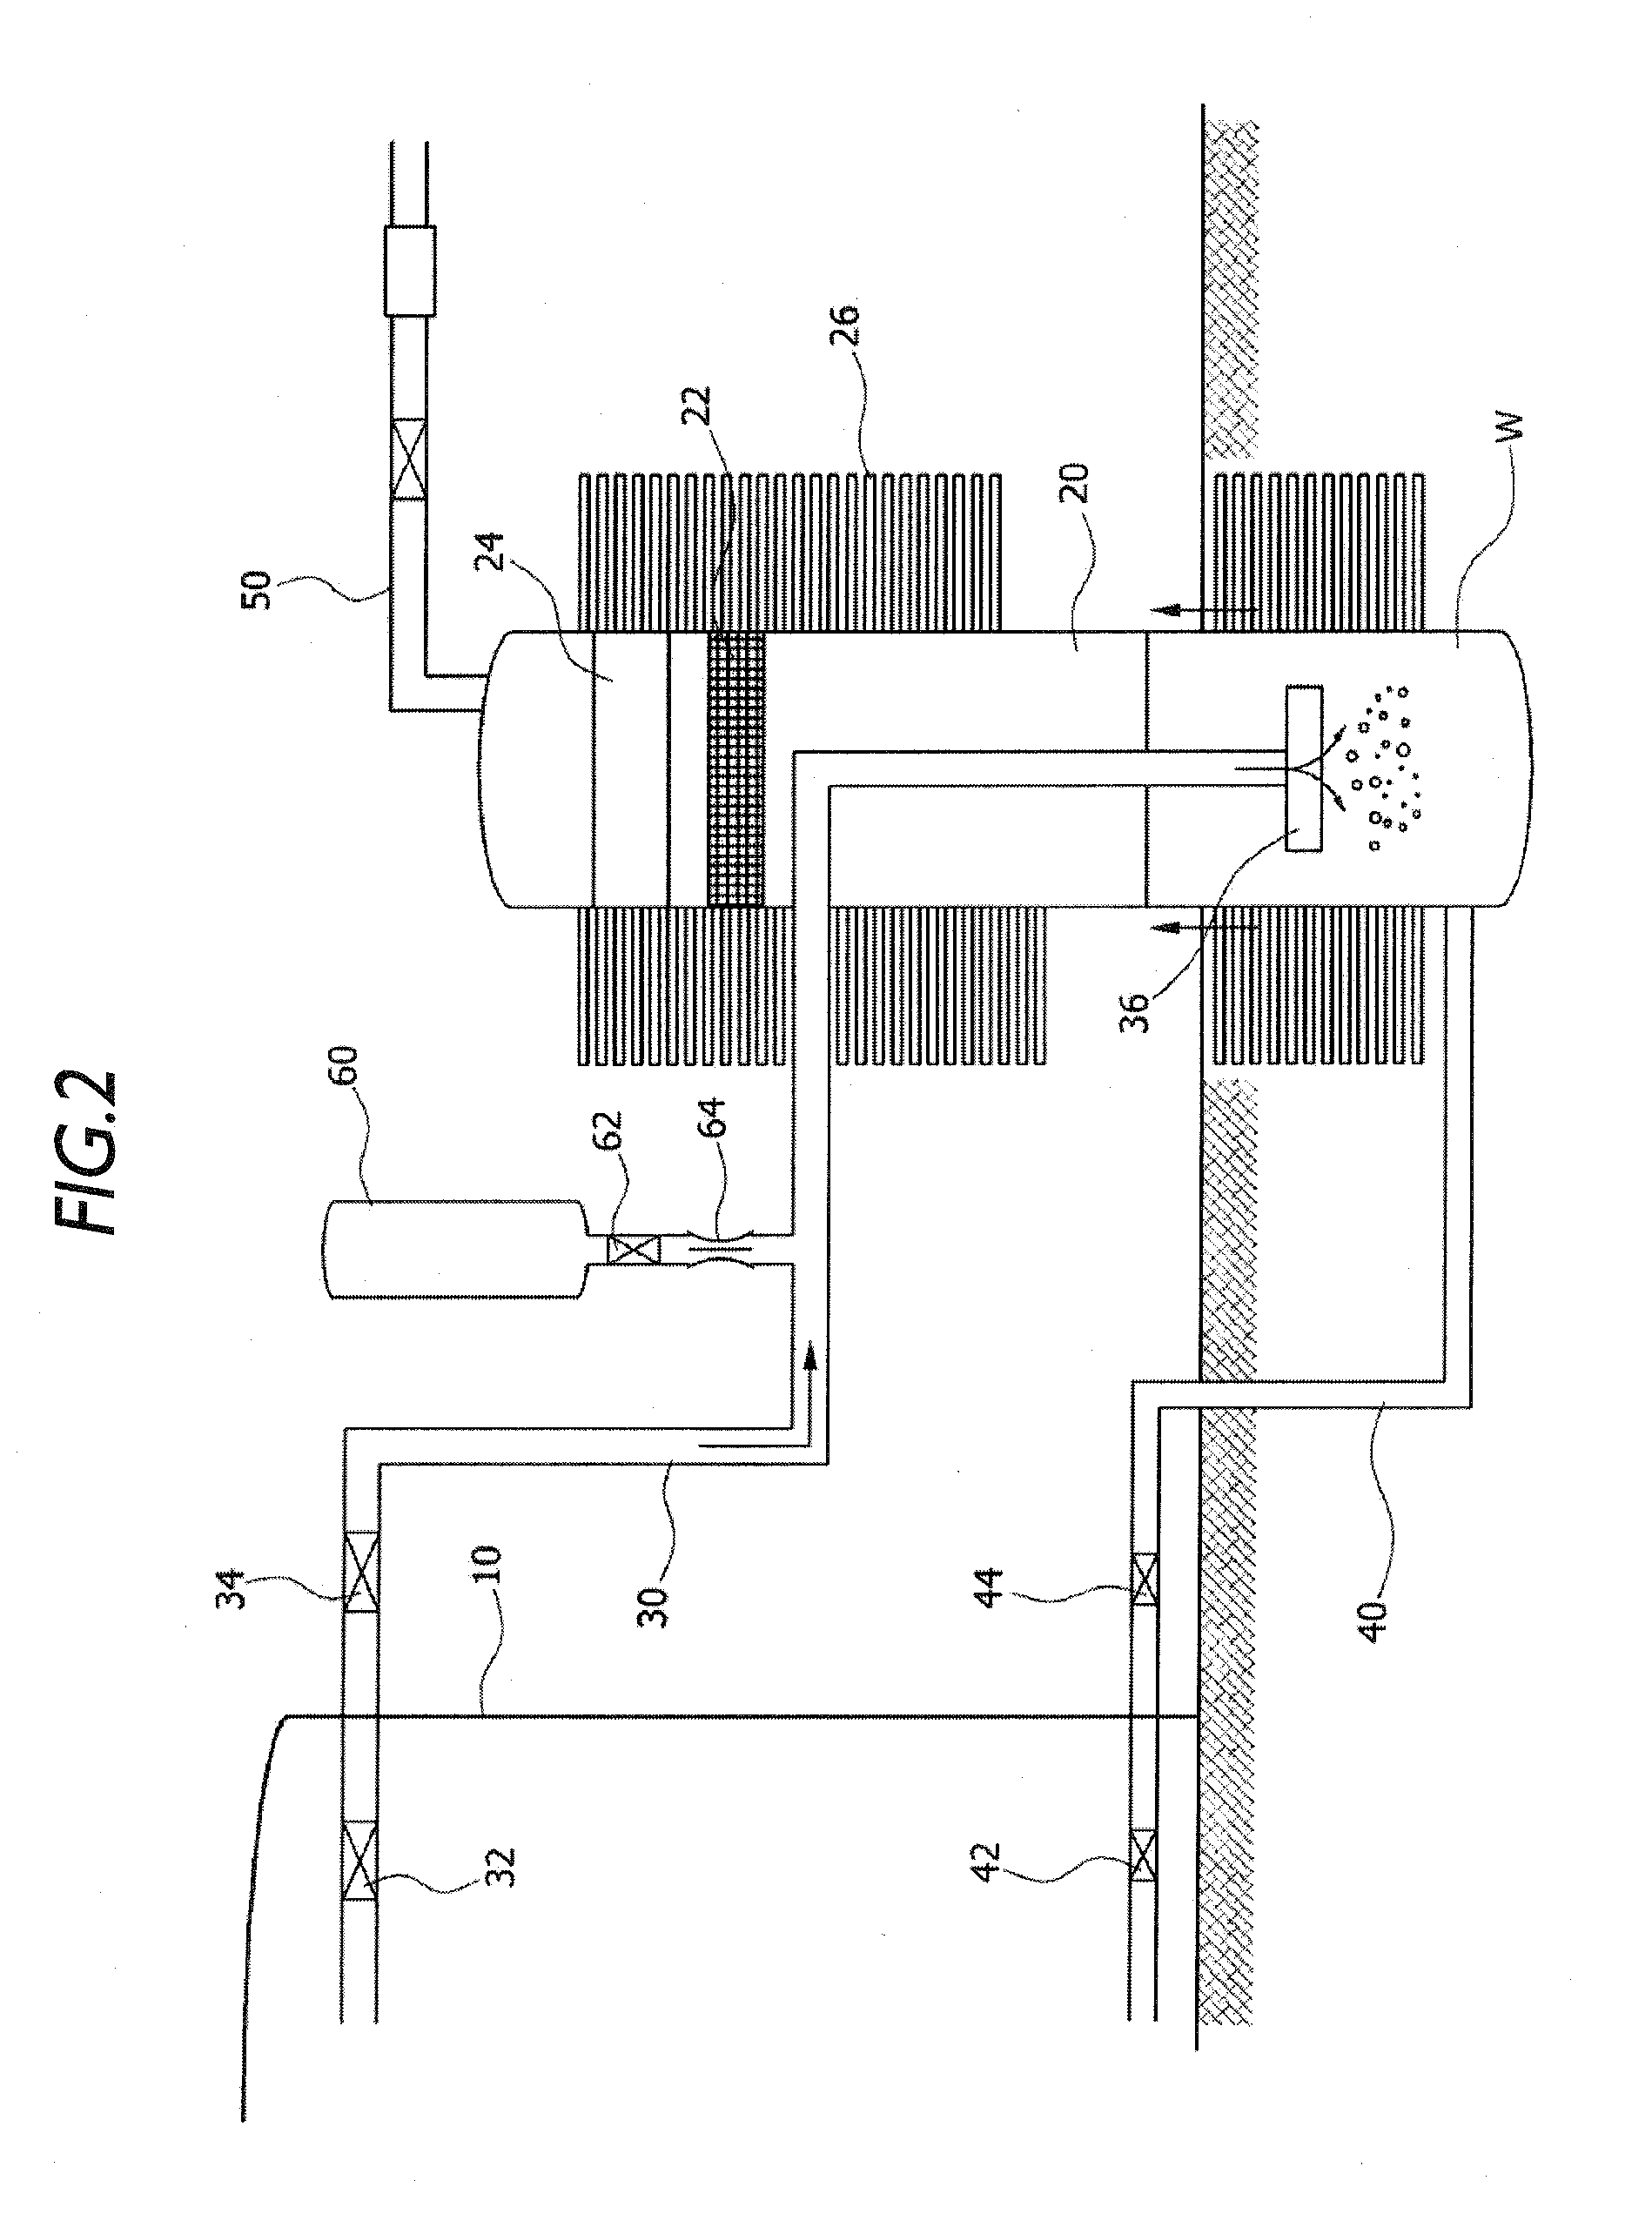 Cooling system of nuclear reactor containment structure